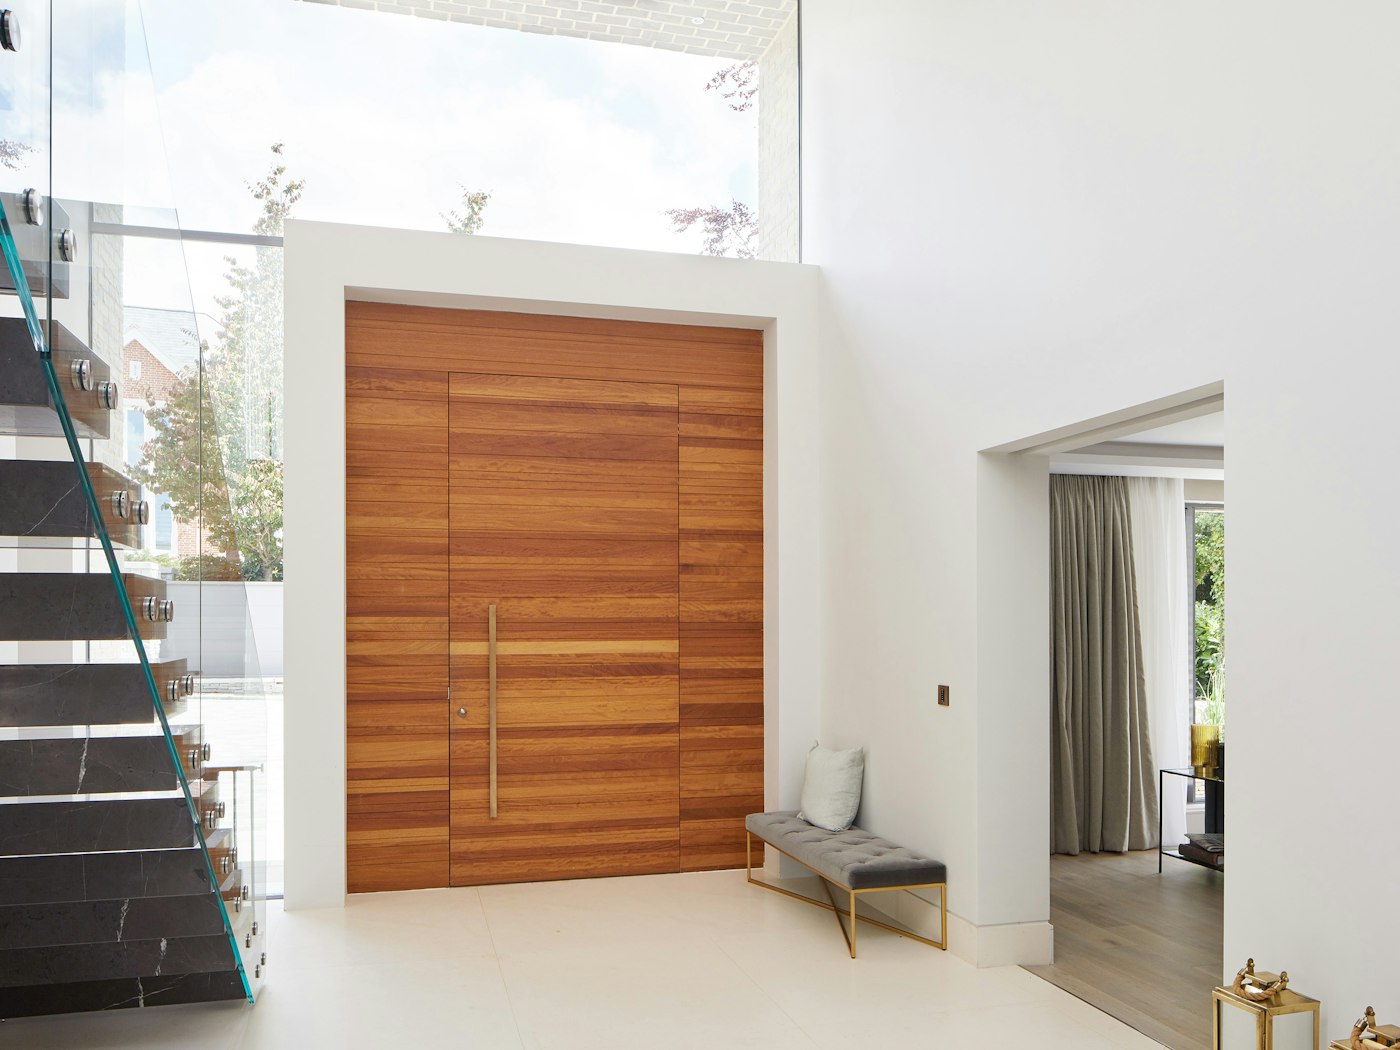 The matching side and overhead panels on the door create enormous impact, with warm iroko adding depth to the cool white walls